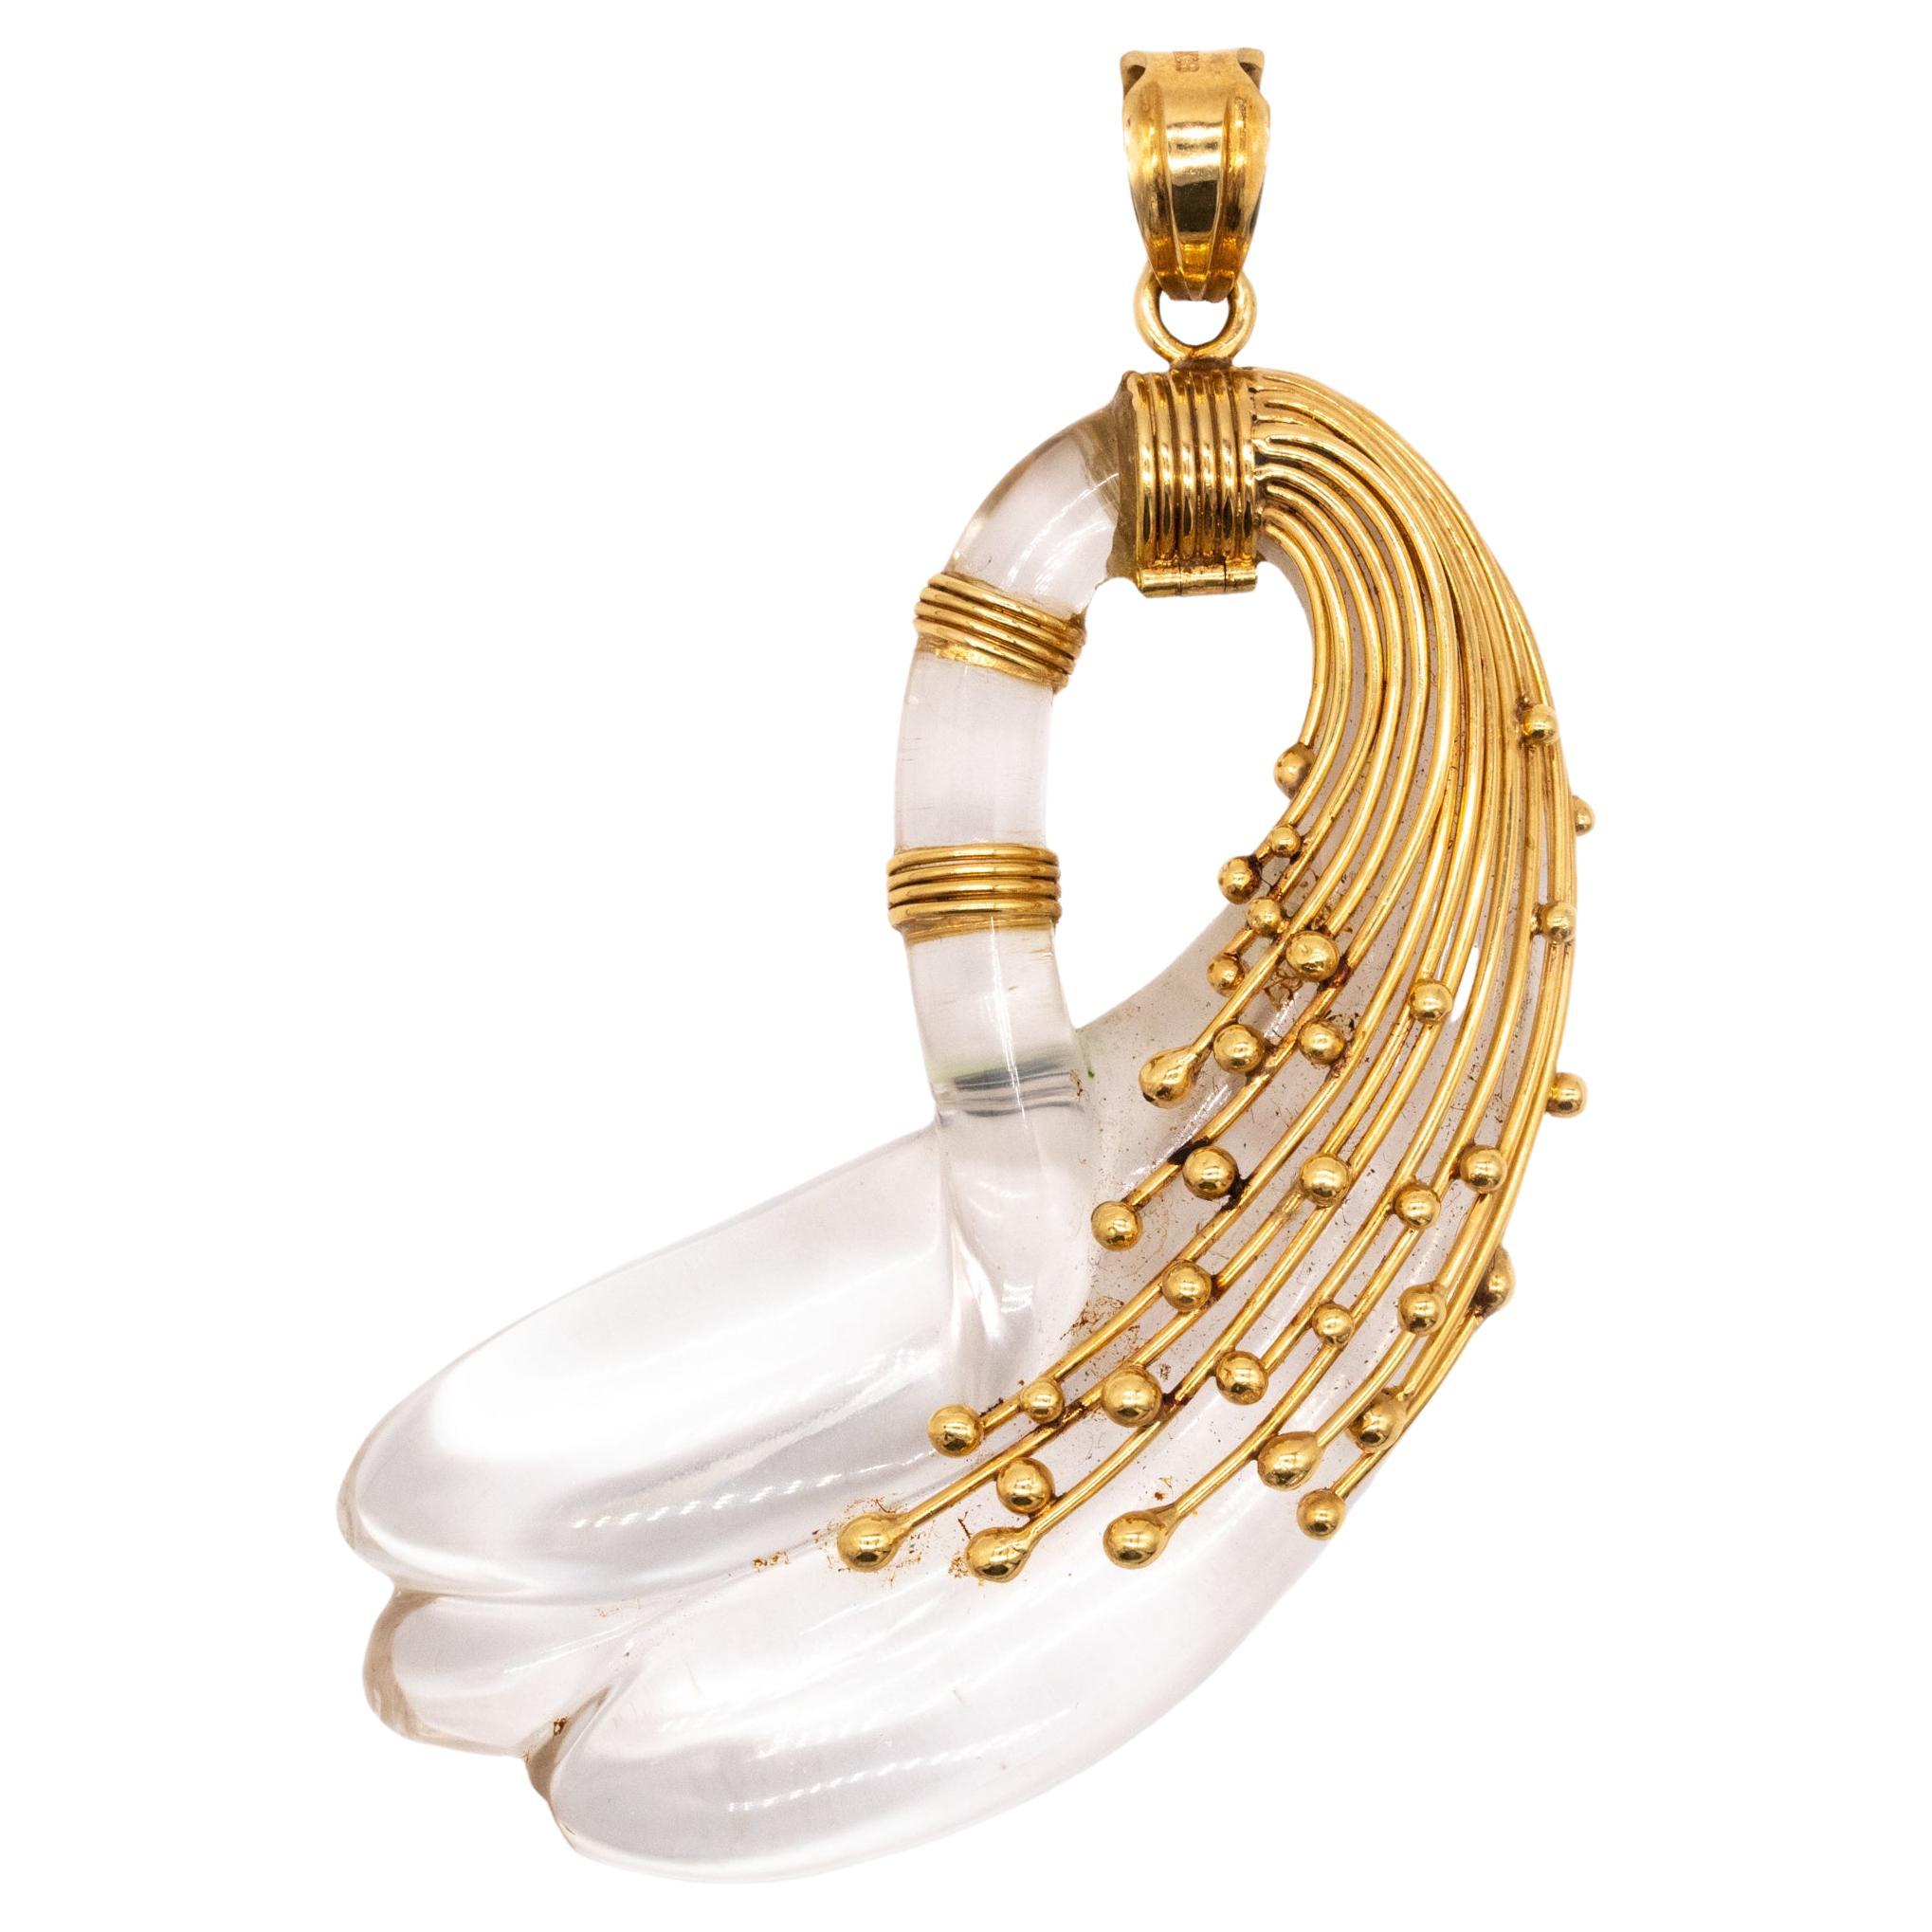 Sculptural Abstraction of Swan Pendant 18Kt Yellow Gold with Carved Rock Crystal